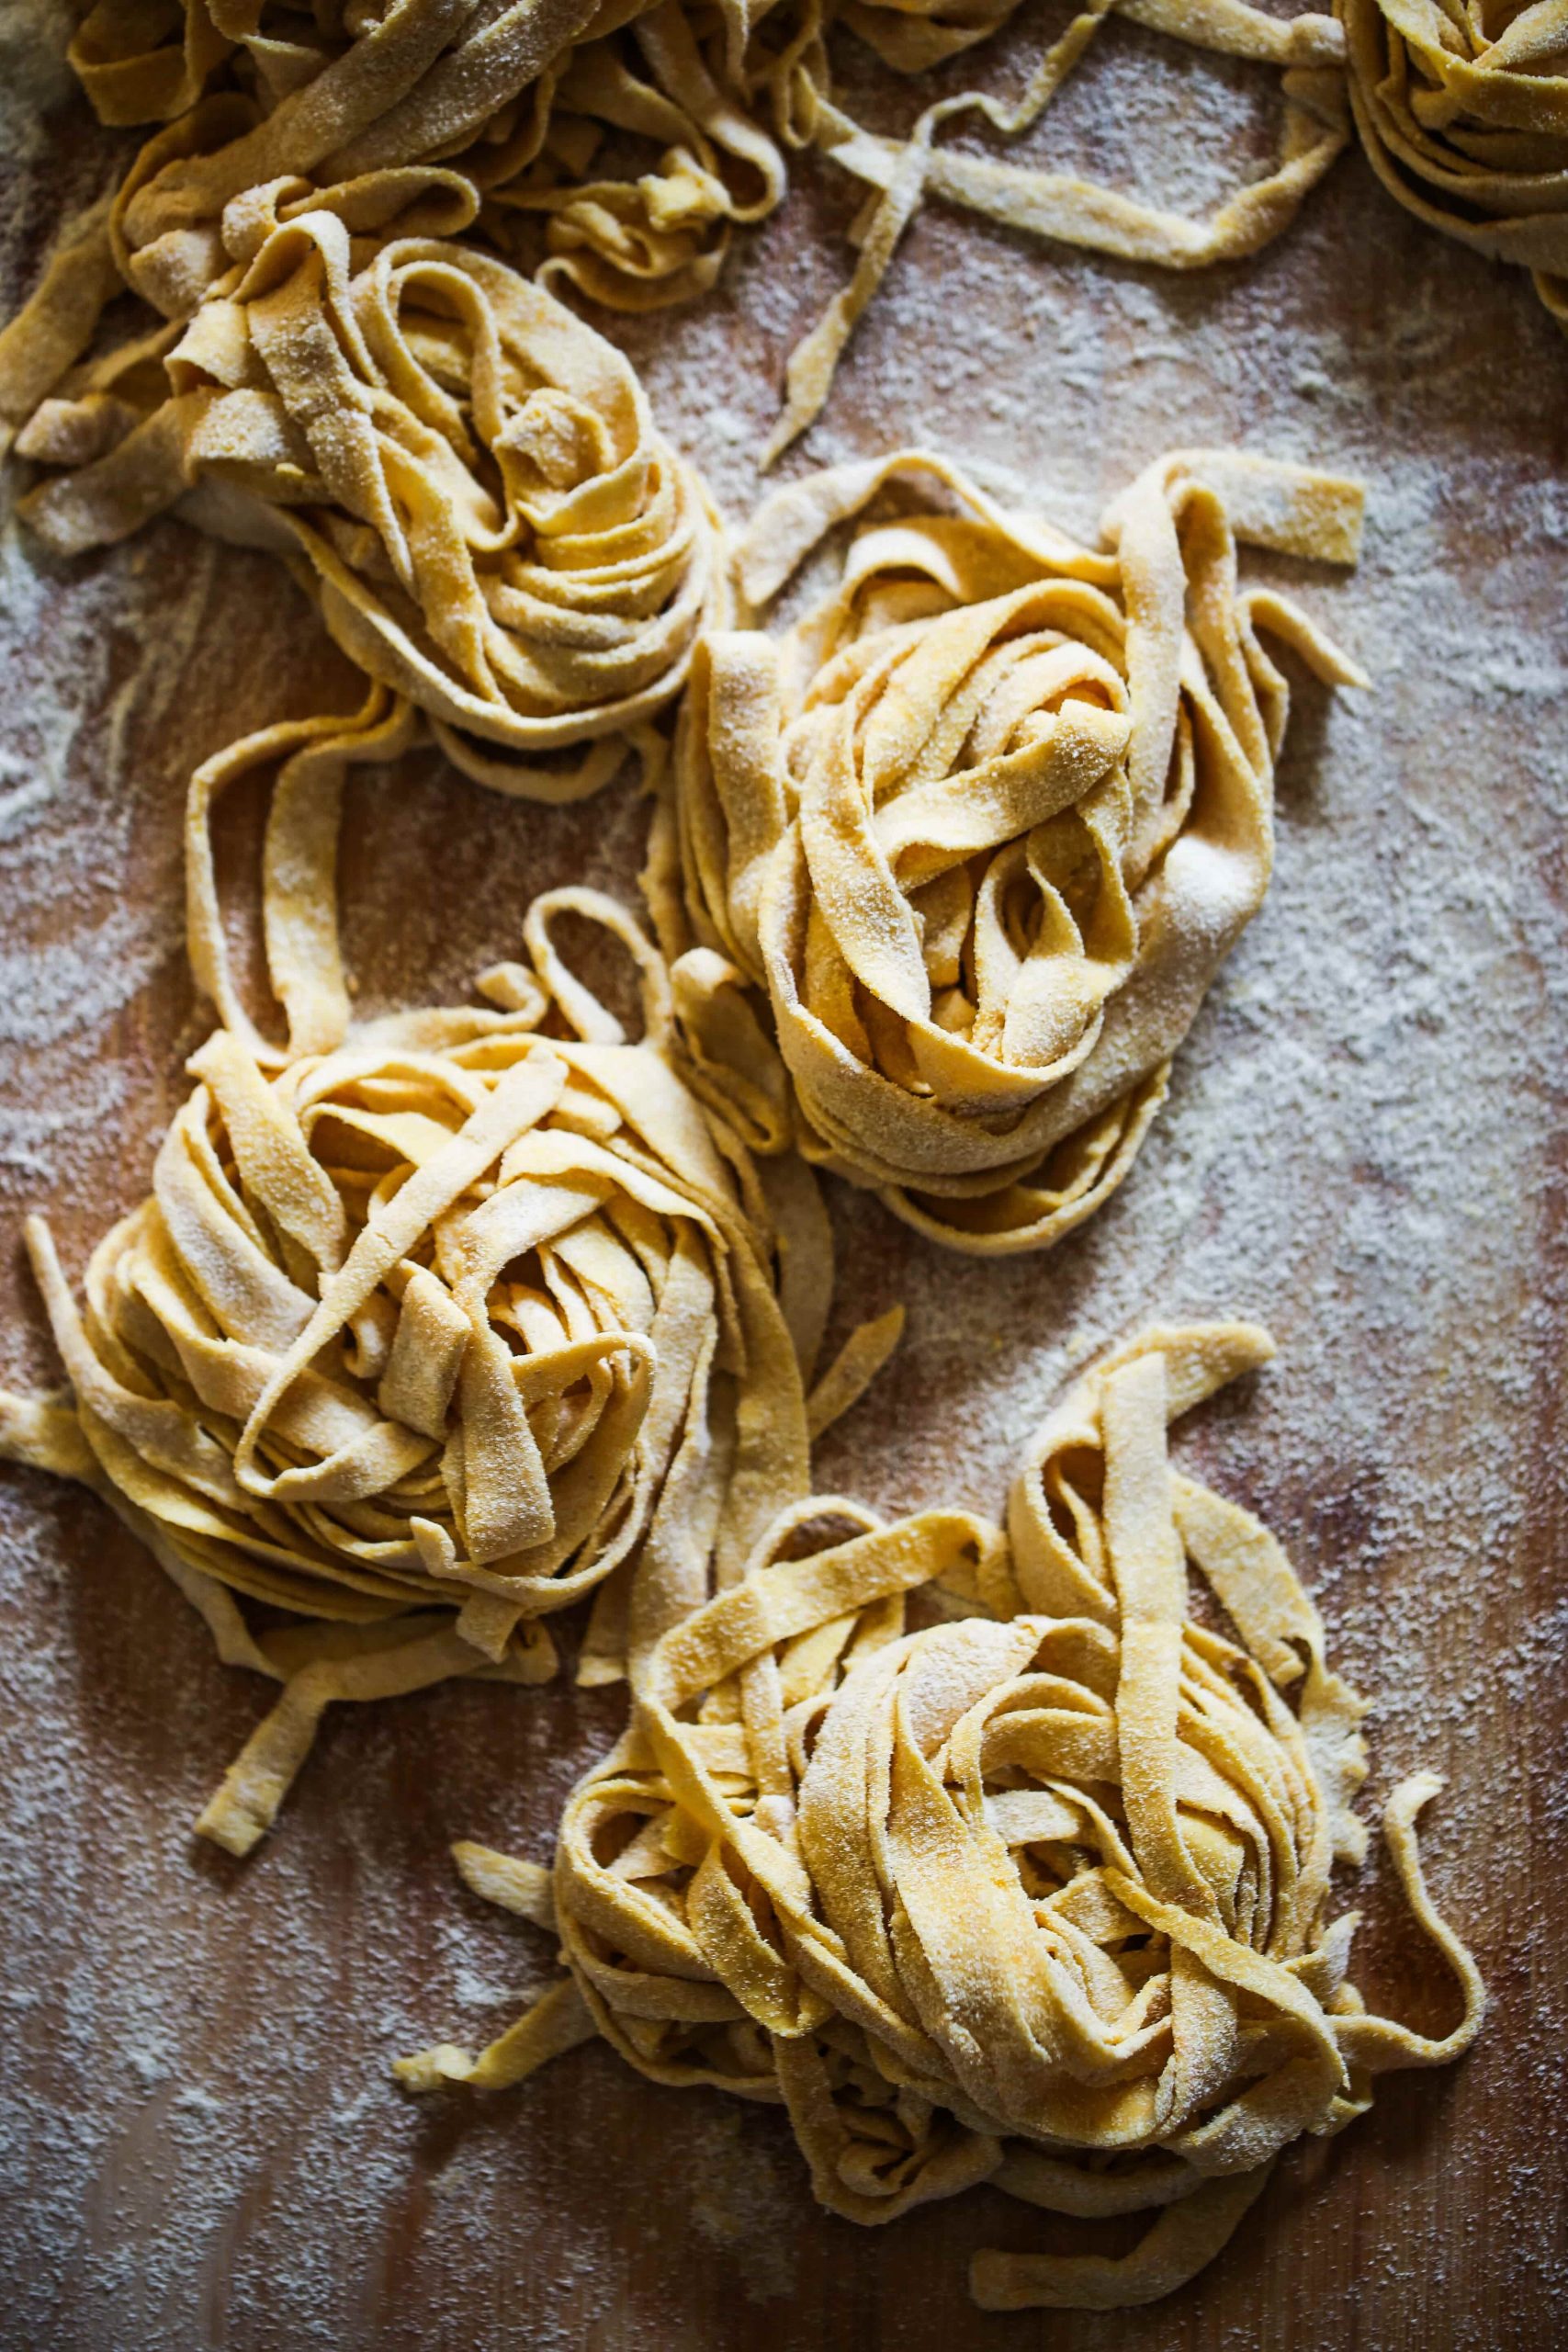 Simple but gourment: the Fettuccine Marciana